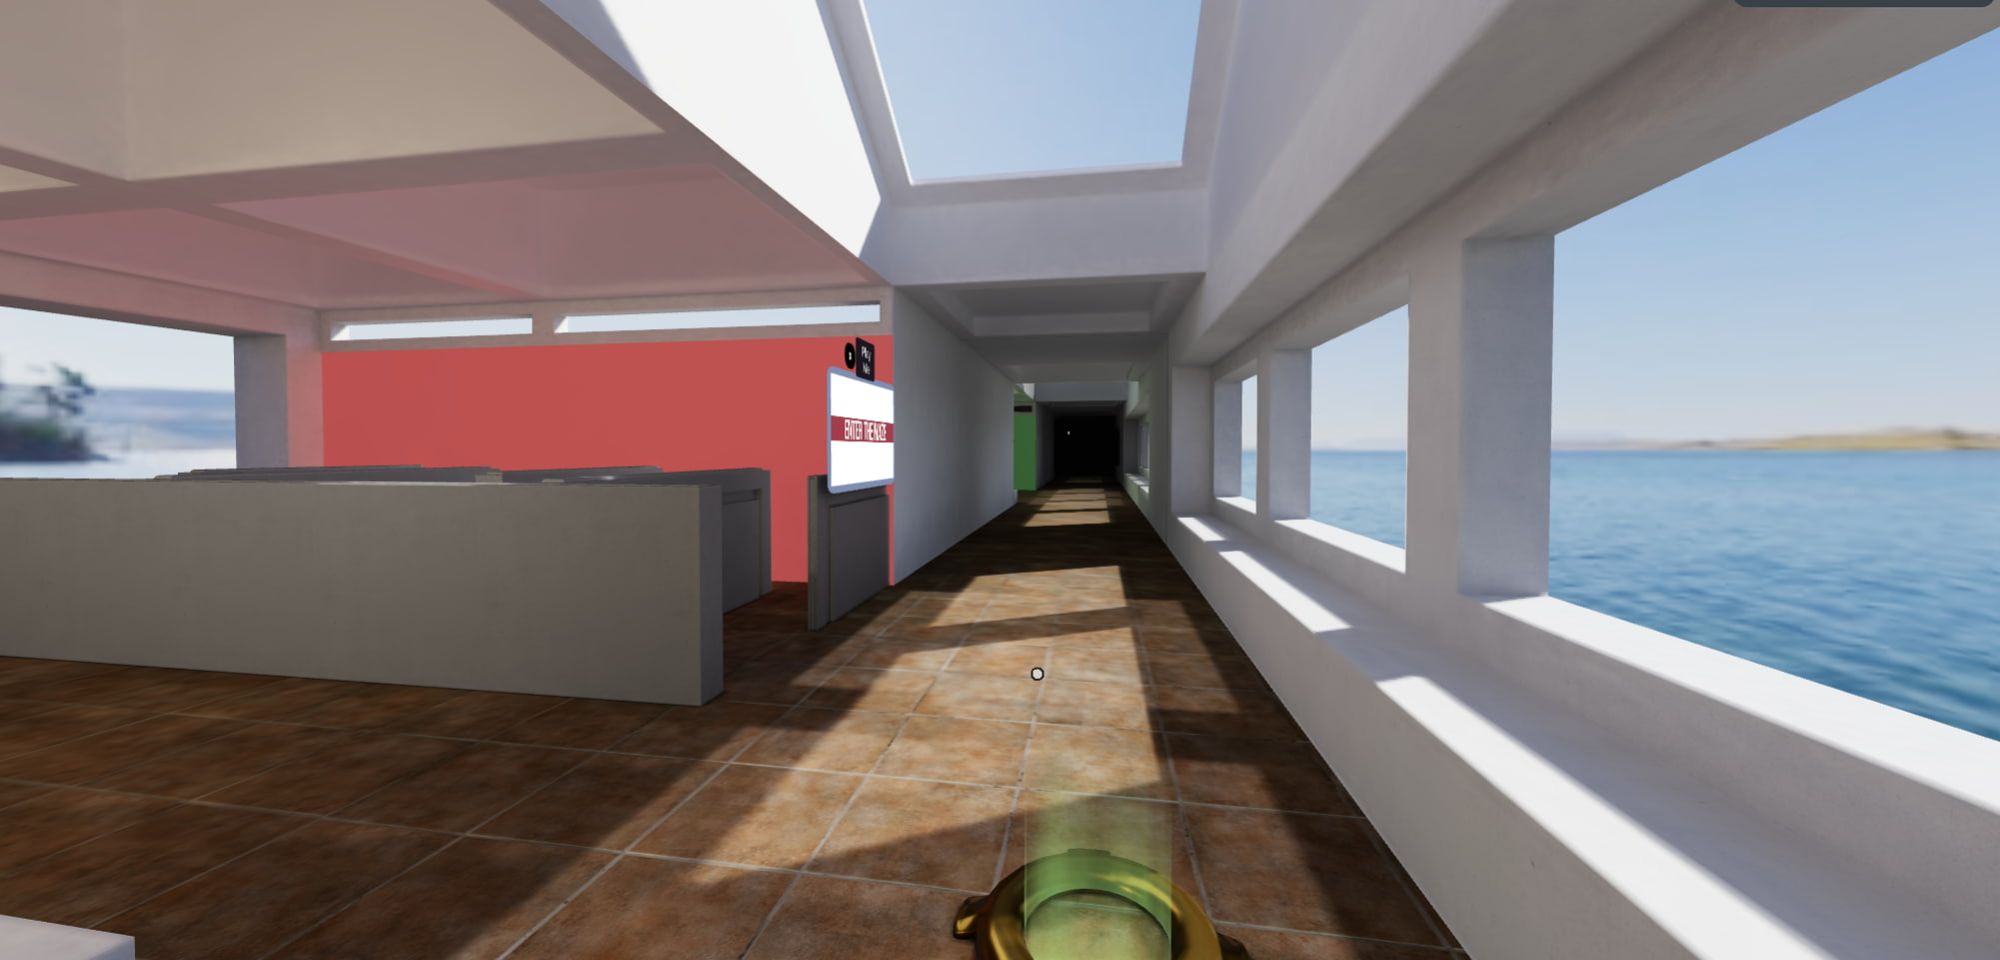 Image of hallway with a pink room to the left and a green room further down.